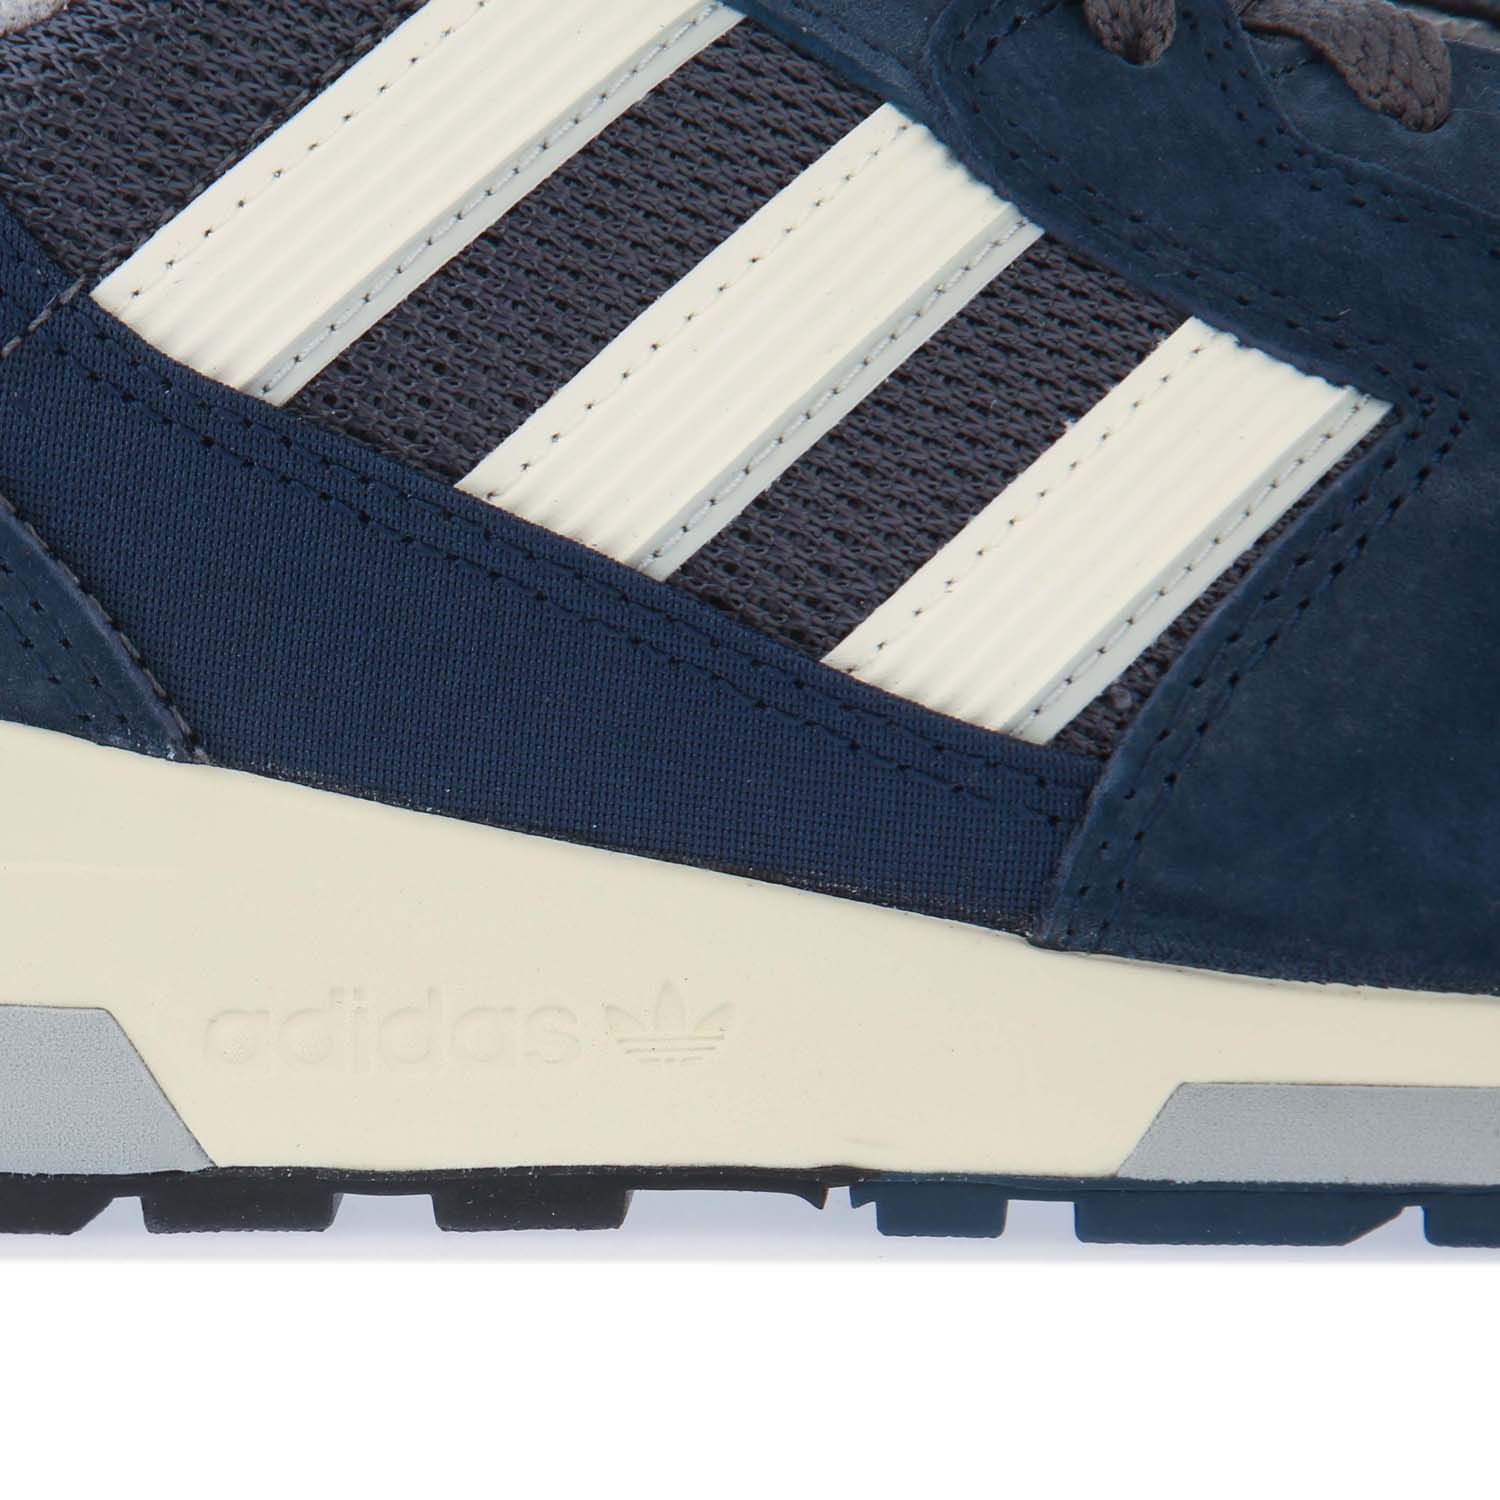 Mens adidas Originals ZX 420 Trainers in navy.- Suede and Mesh upper.- Lace closure.- Low-profile design. - Padded tongue and cuff. - Signature adidas branding.- adidas Trefoil logo on tongue and heel.- EVA midsole.- Rubber Outsole. - Leather upper  Leather lining  Synthetic sole.- Ref.: FZ0145